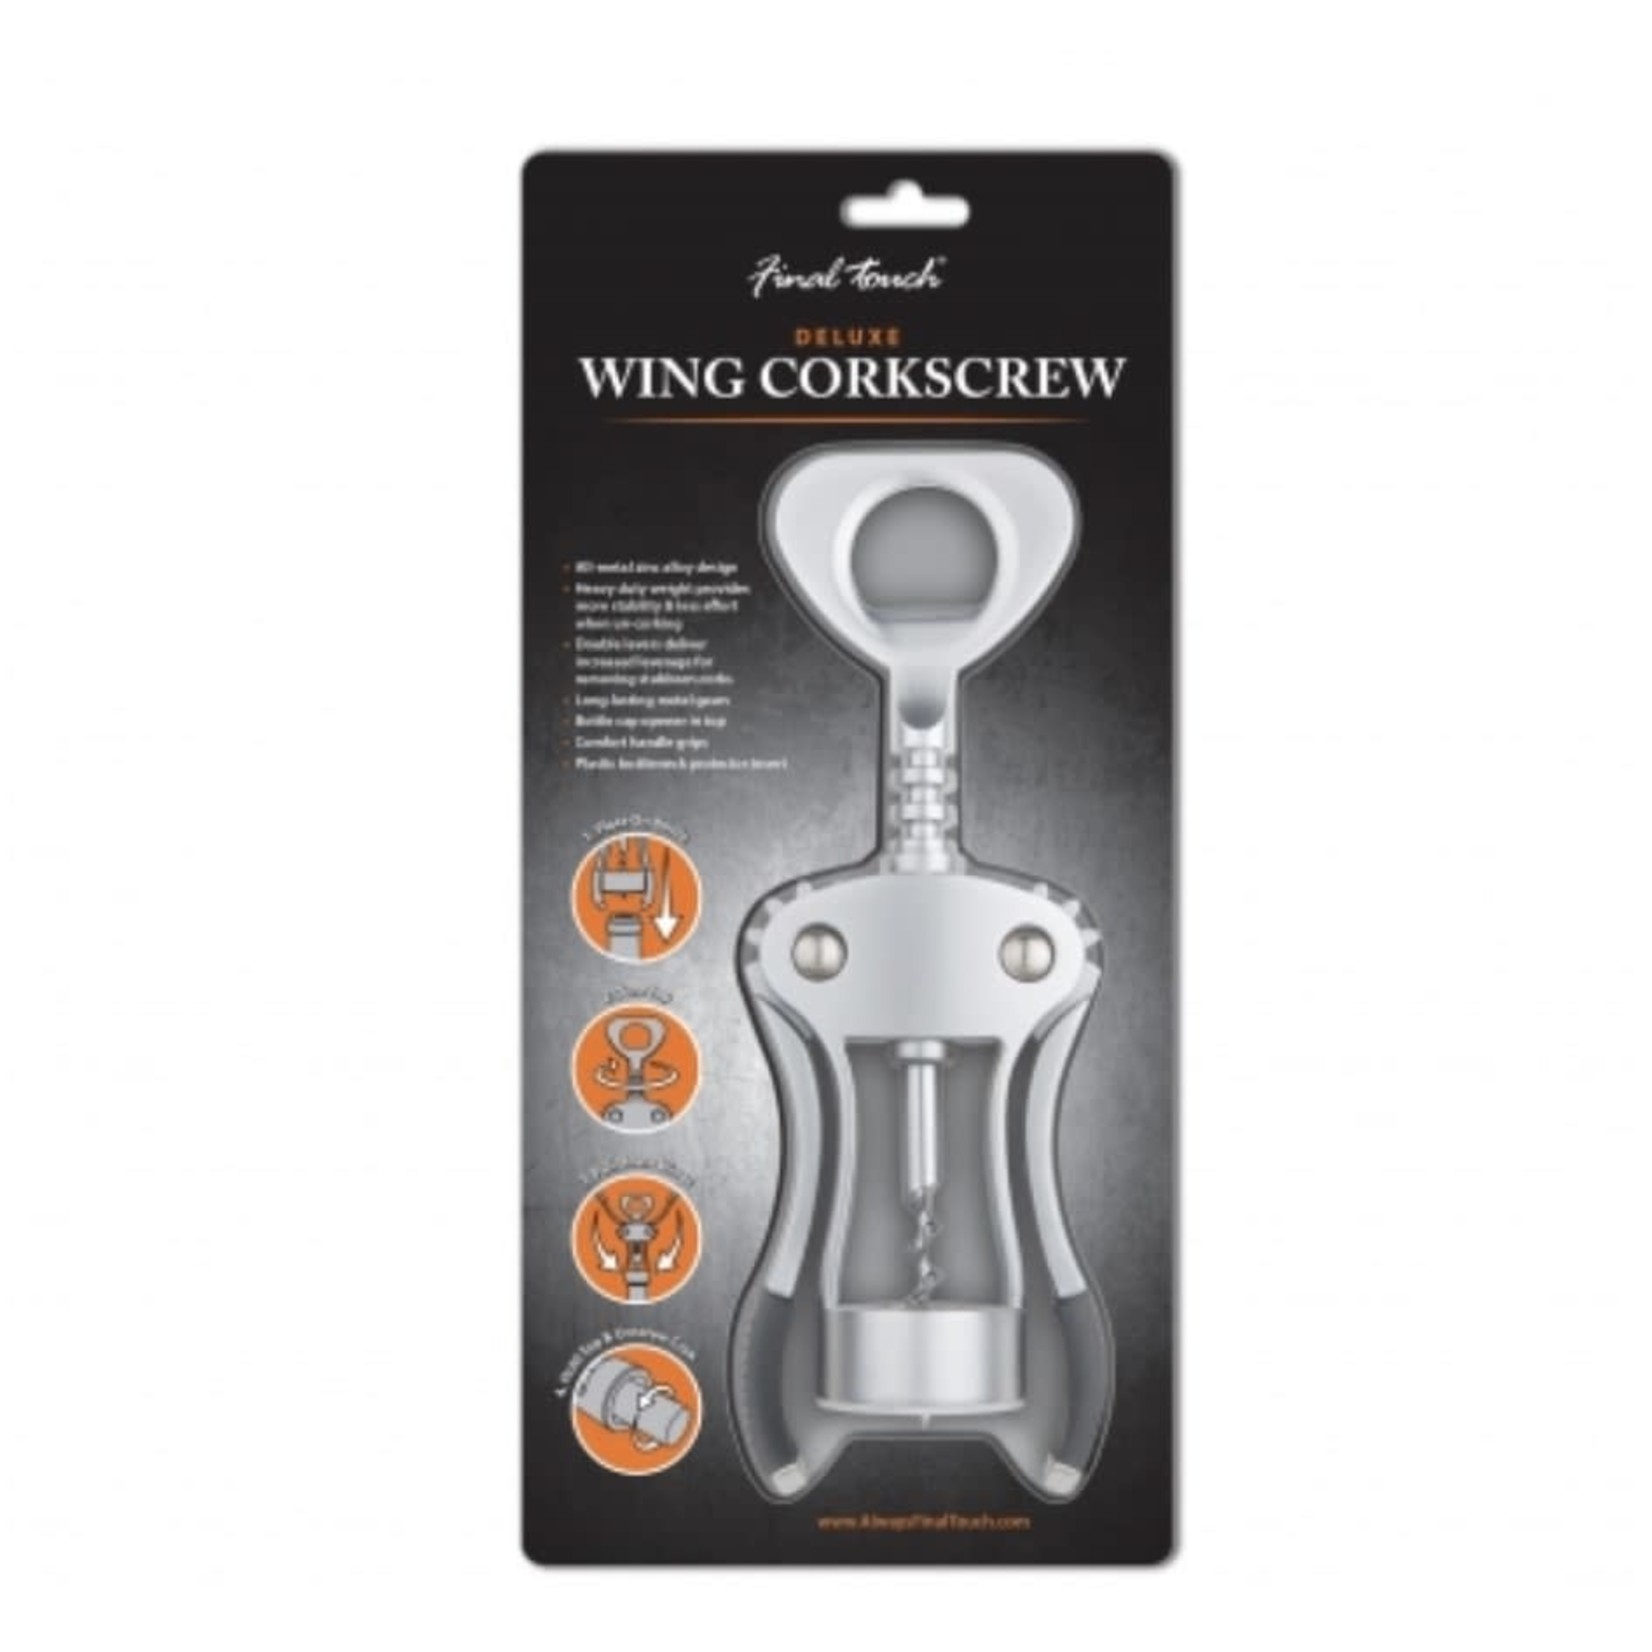 FINAL TOUCH FINAL TOUCH Deluxe Wing Corkscrew